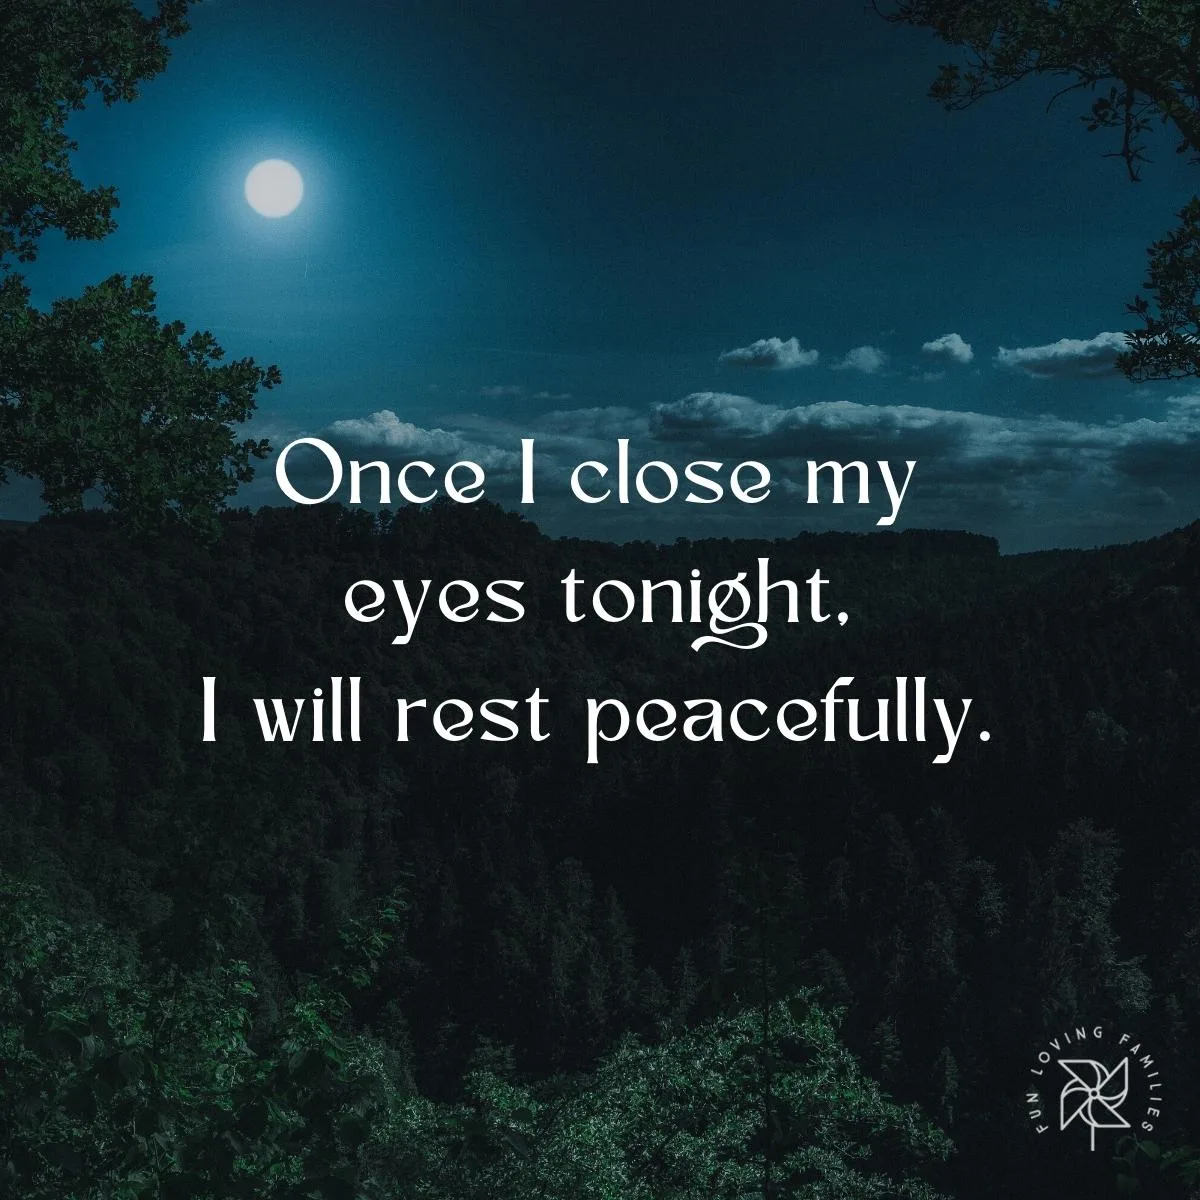 Once I close my eyes tonight, I will rest peacefully affirmation